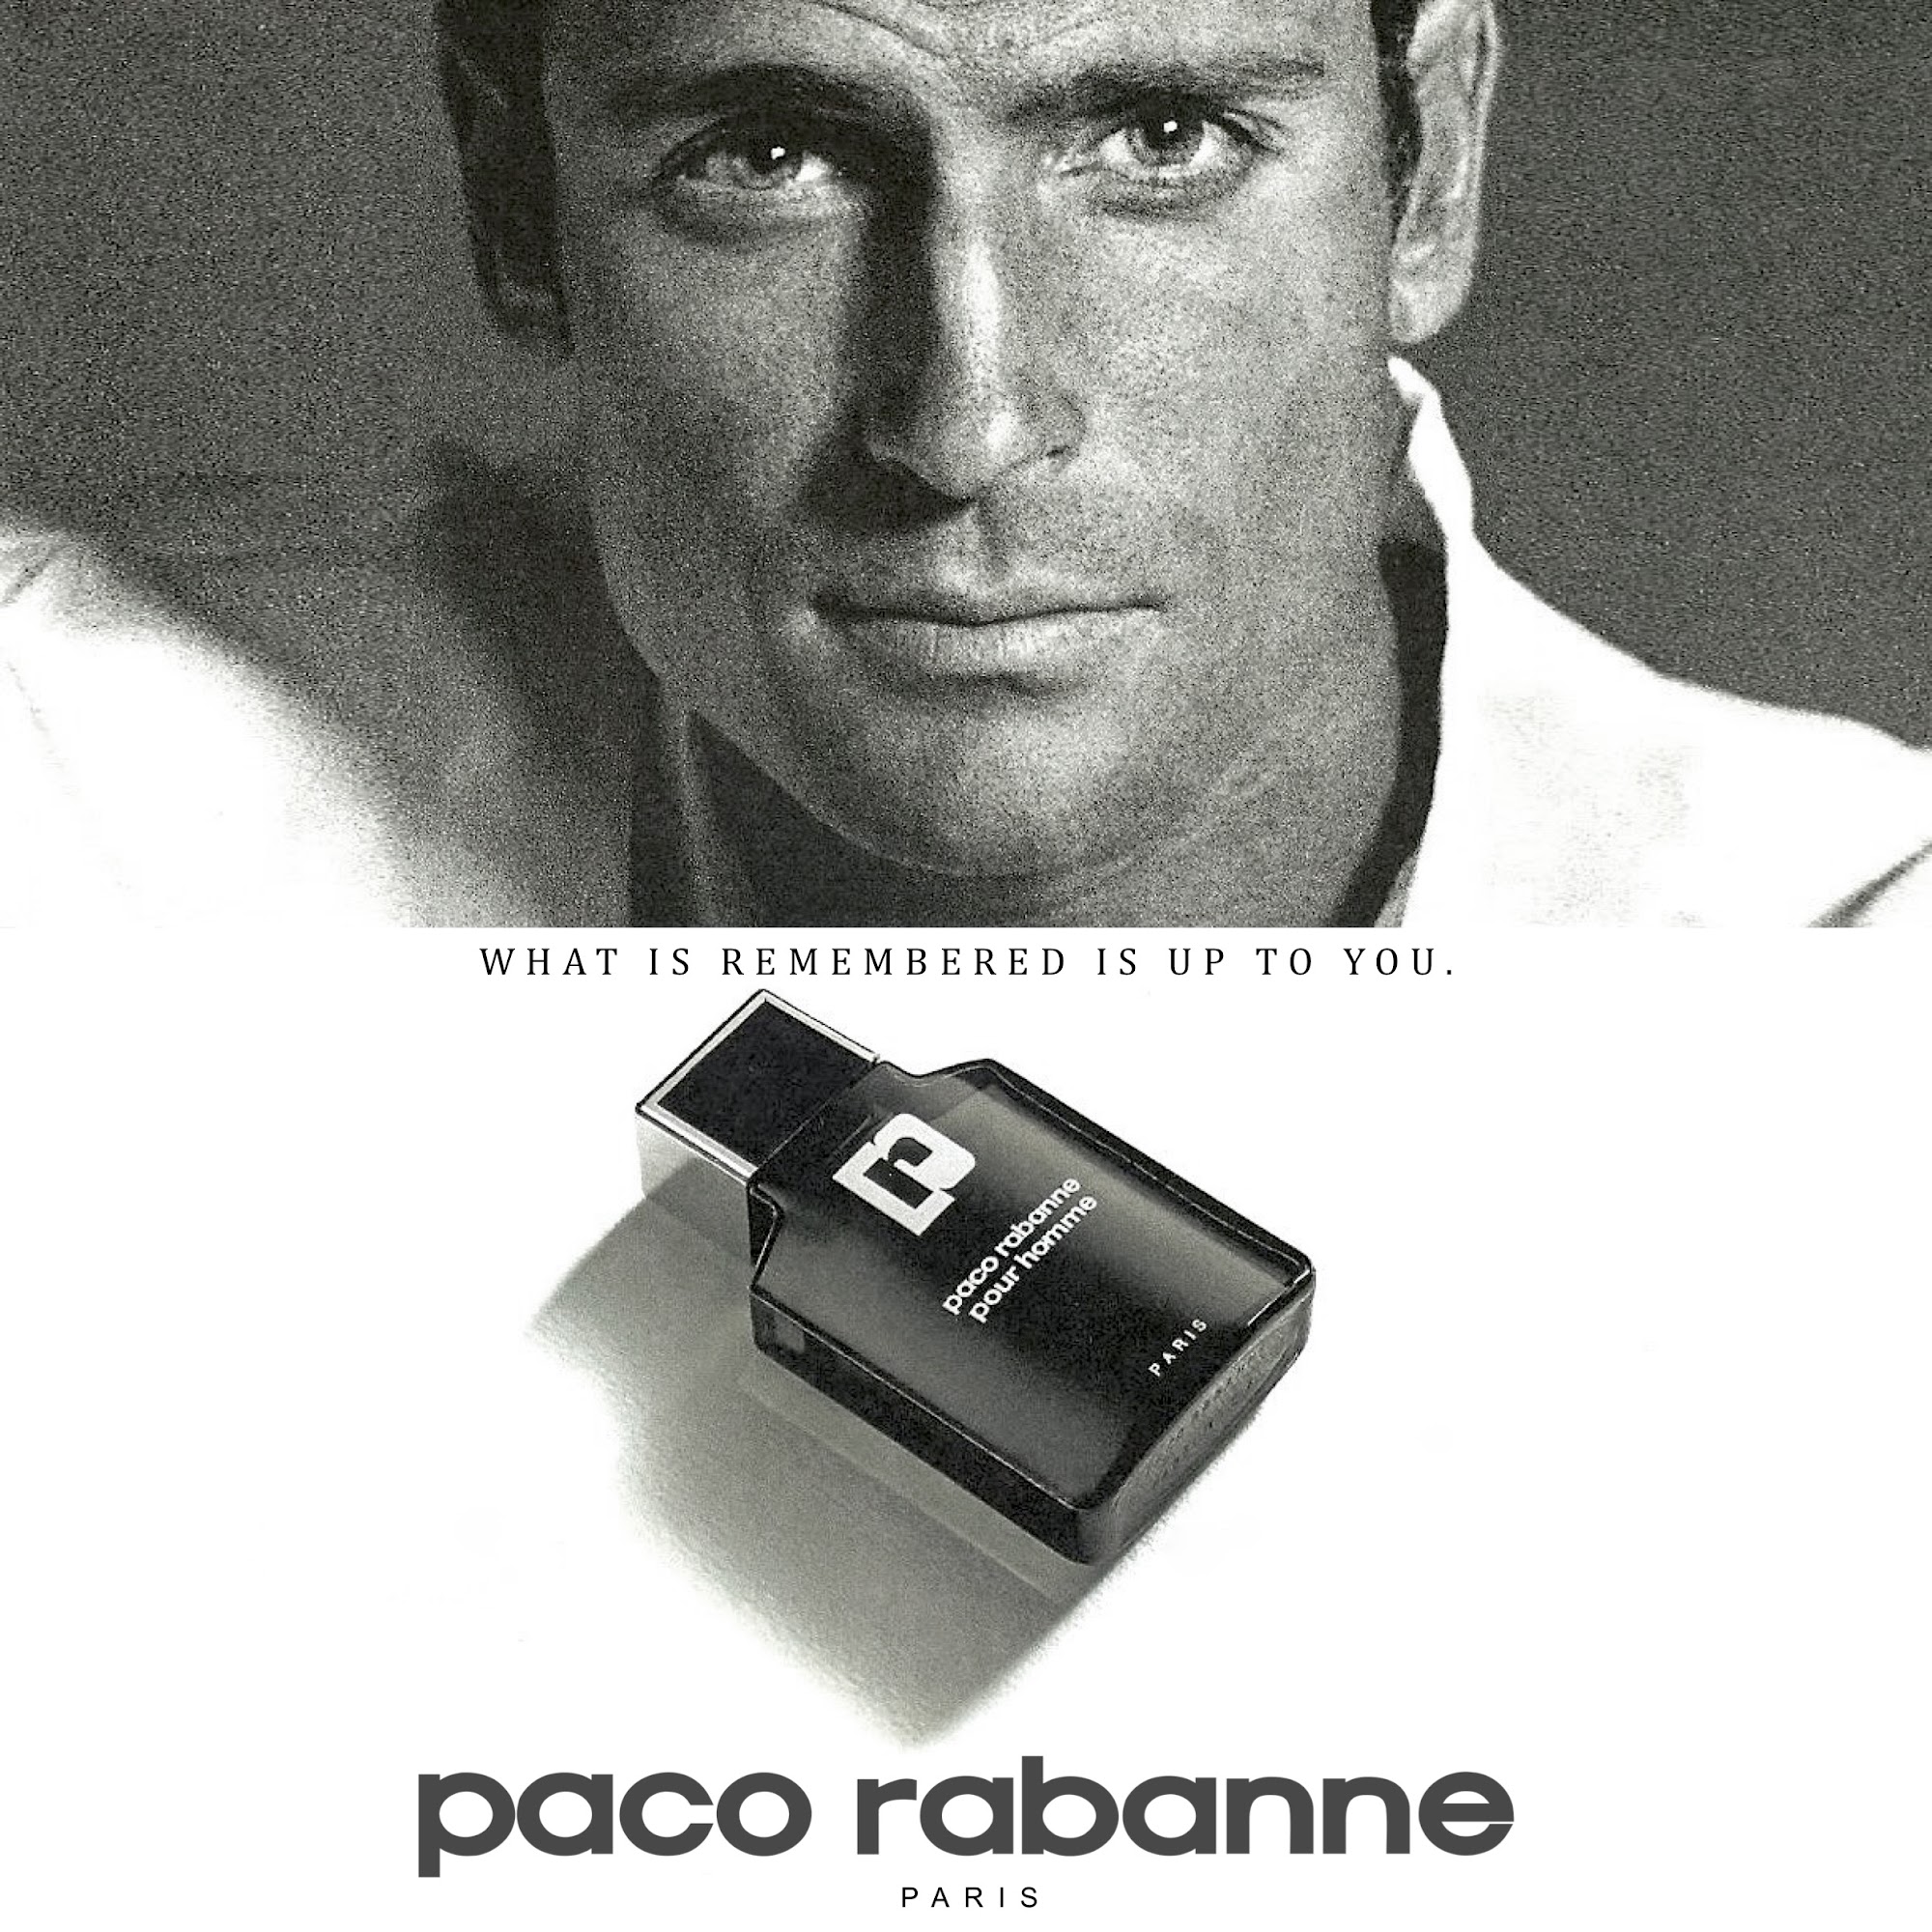 An original advert for Paco Rabanne Pour Homme